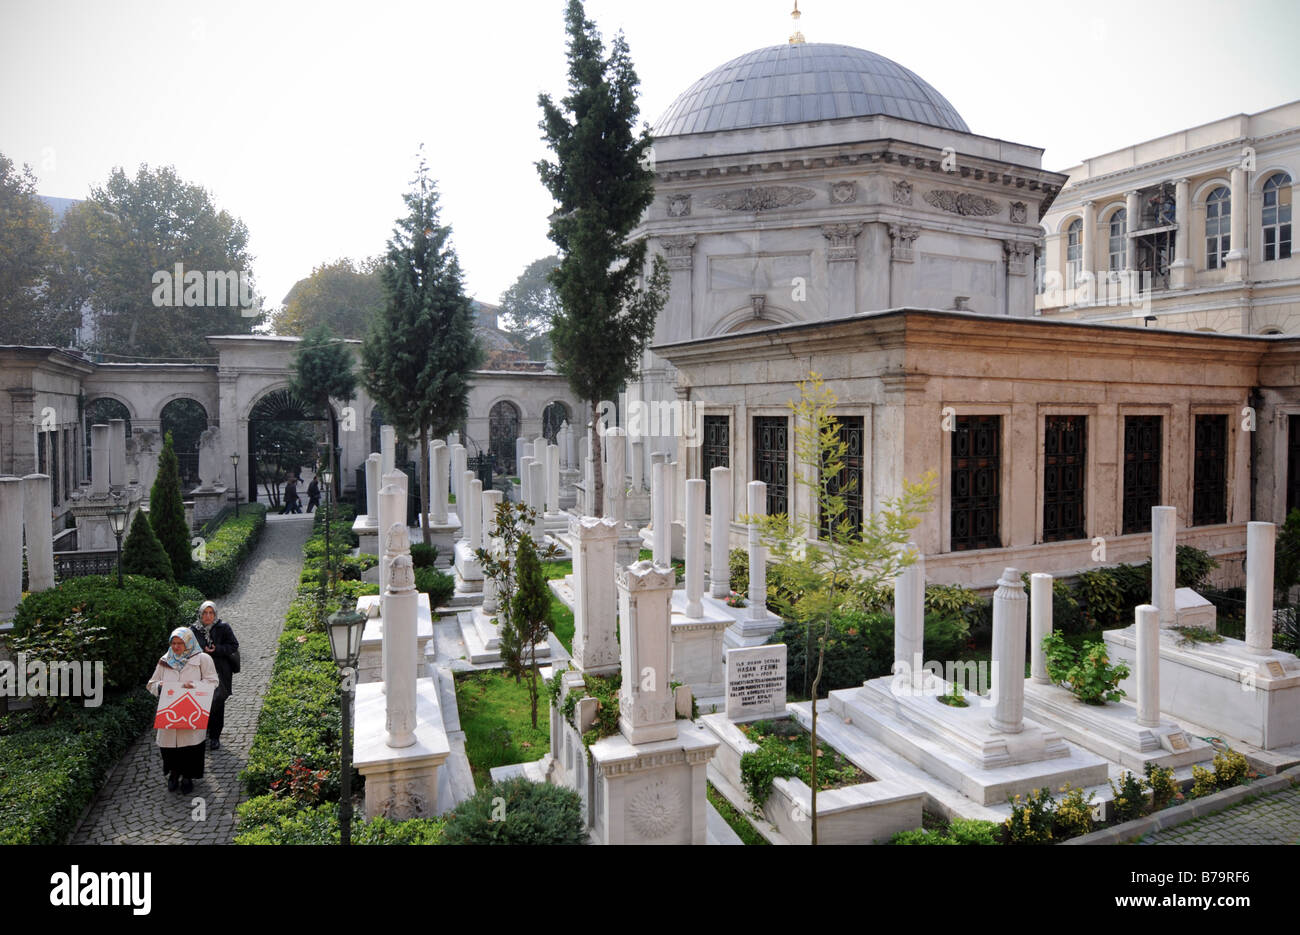 An important Muslim graveyard- the burial place for many  Sultans and prominent leaders- in Eminonu, Istanbul, Turkey. Stock Photo